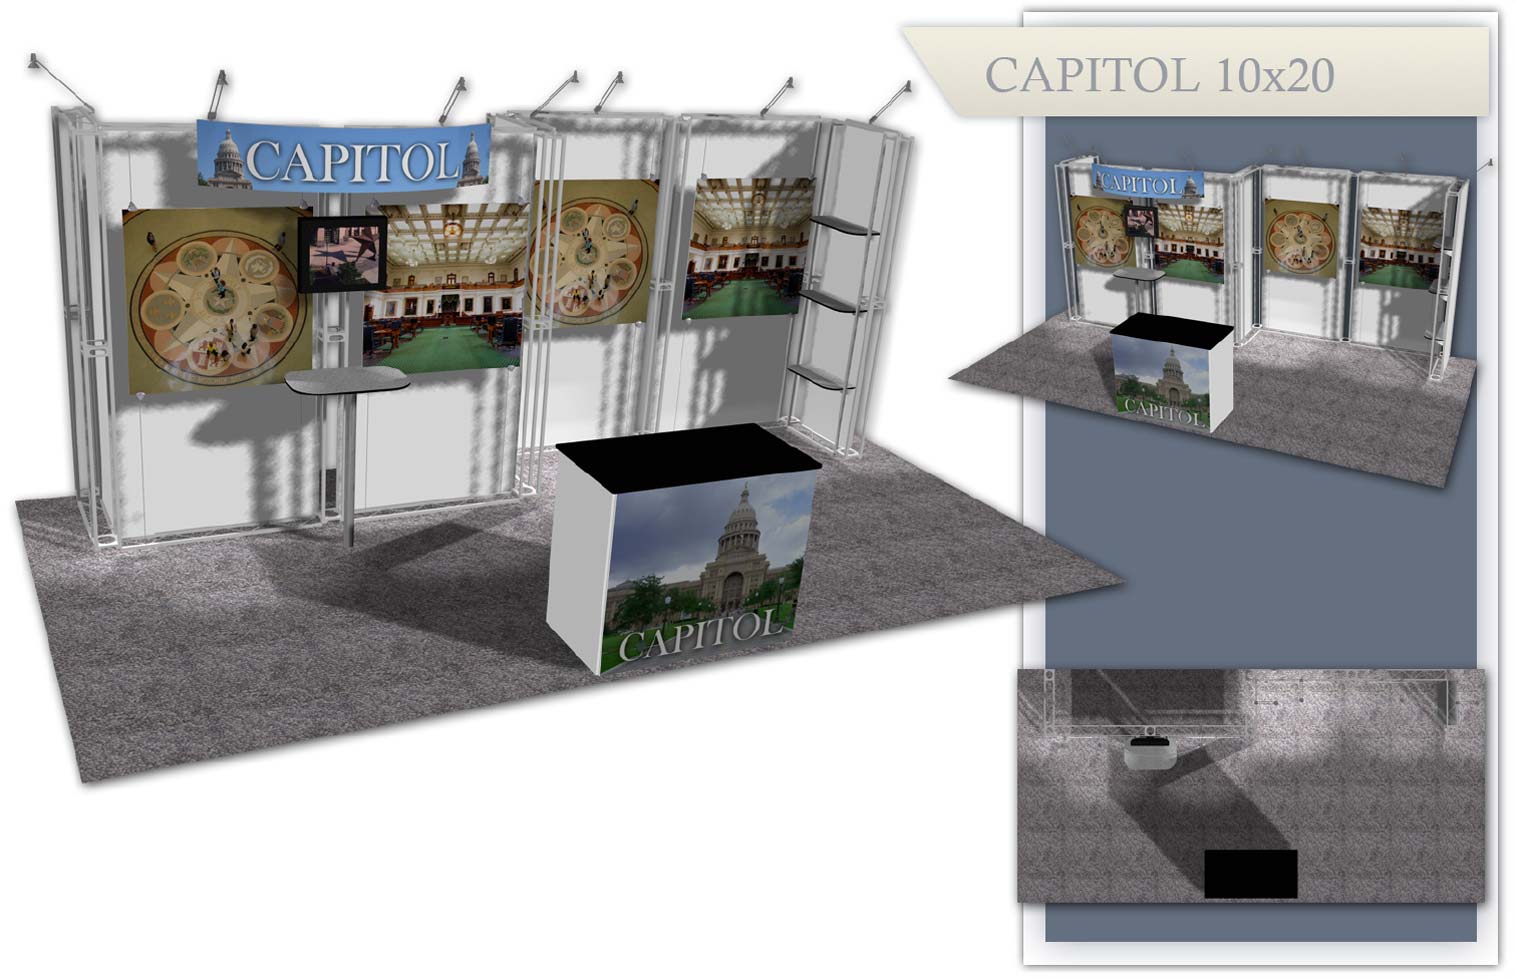 Capitol Used Trade Show Booth - 10x10